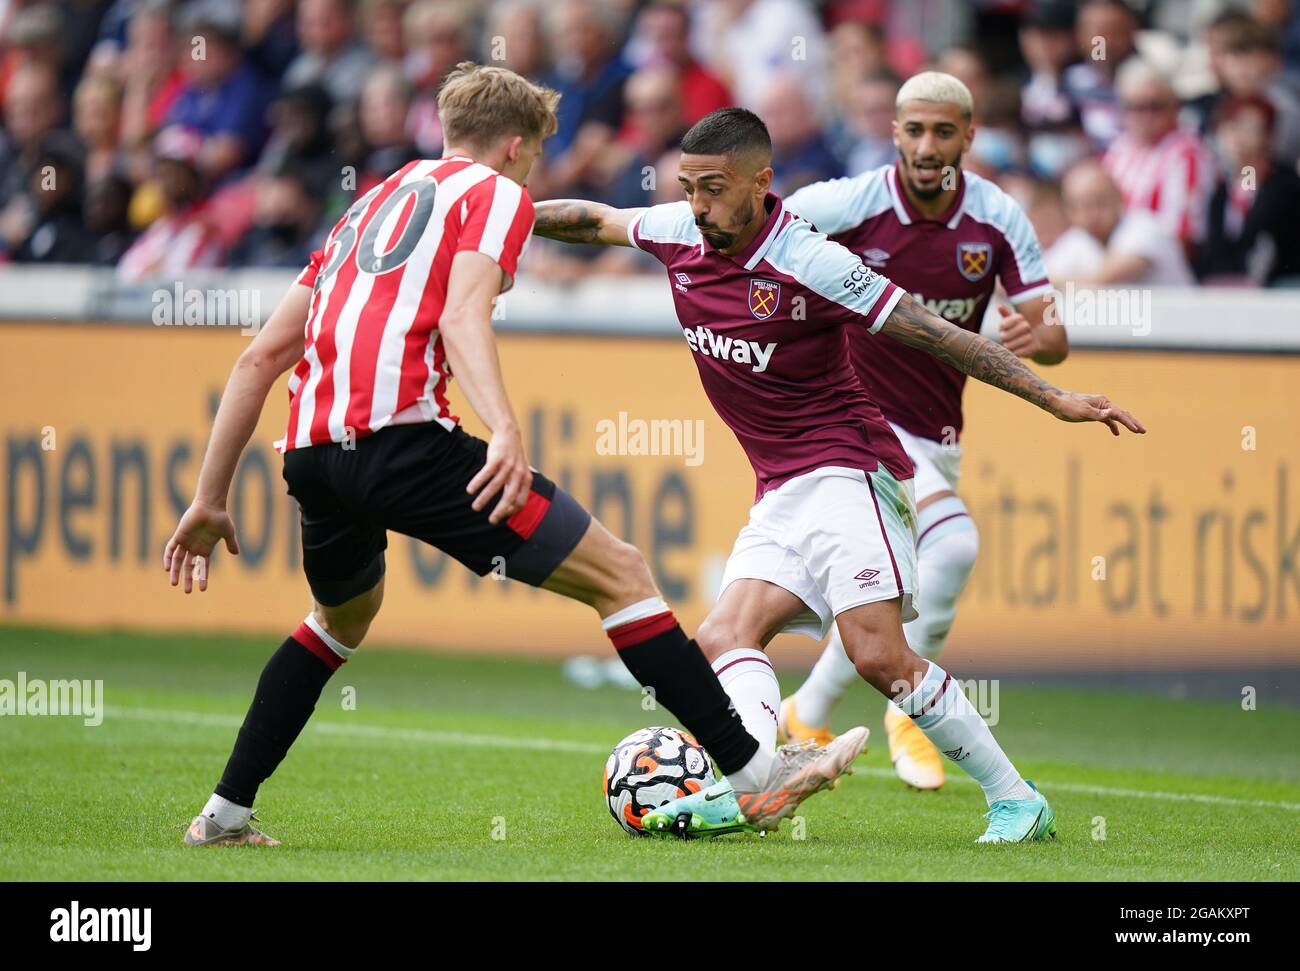 West Ham United's Manuel Lanzini (right) takes on Brentford's Mads Roerslev Rasmussen during the pre-season friendly match at the Brentford Community Stadium, London. Picture date: Saturday July 31, 2021. Stock Photo